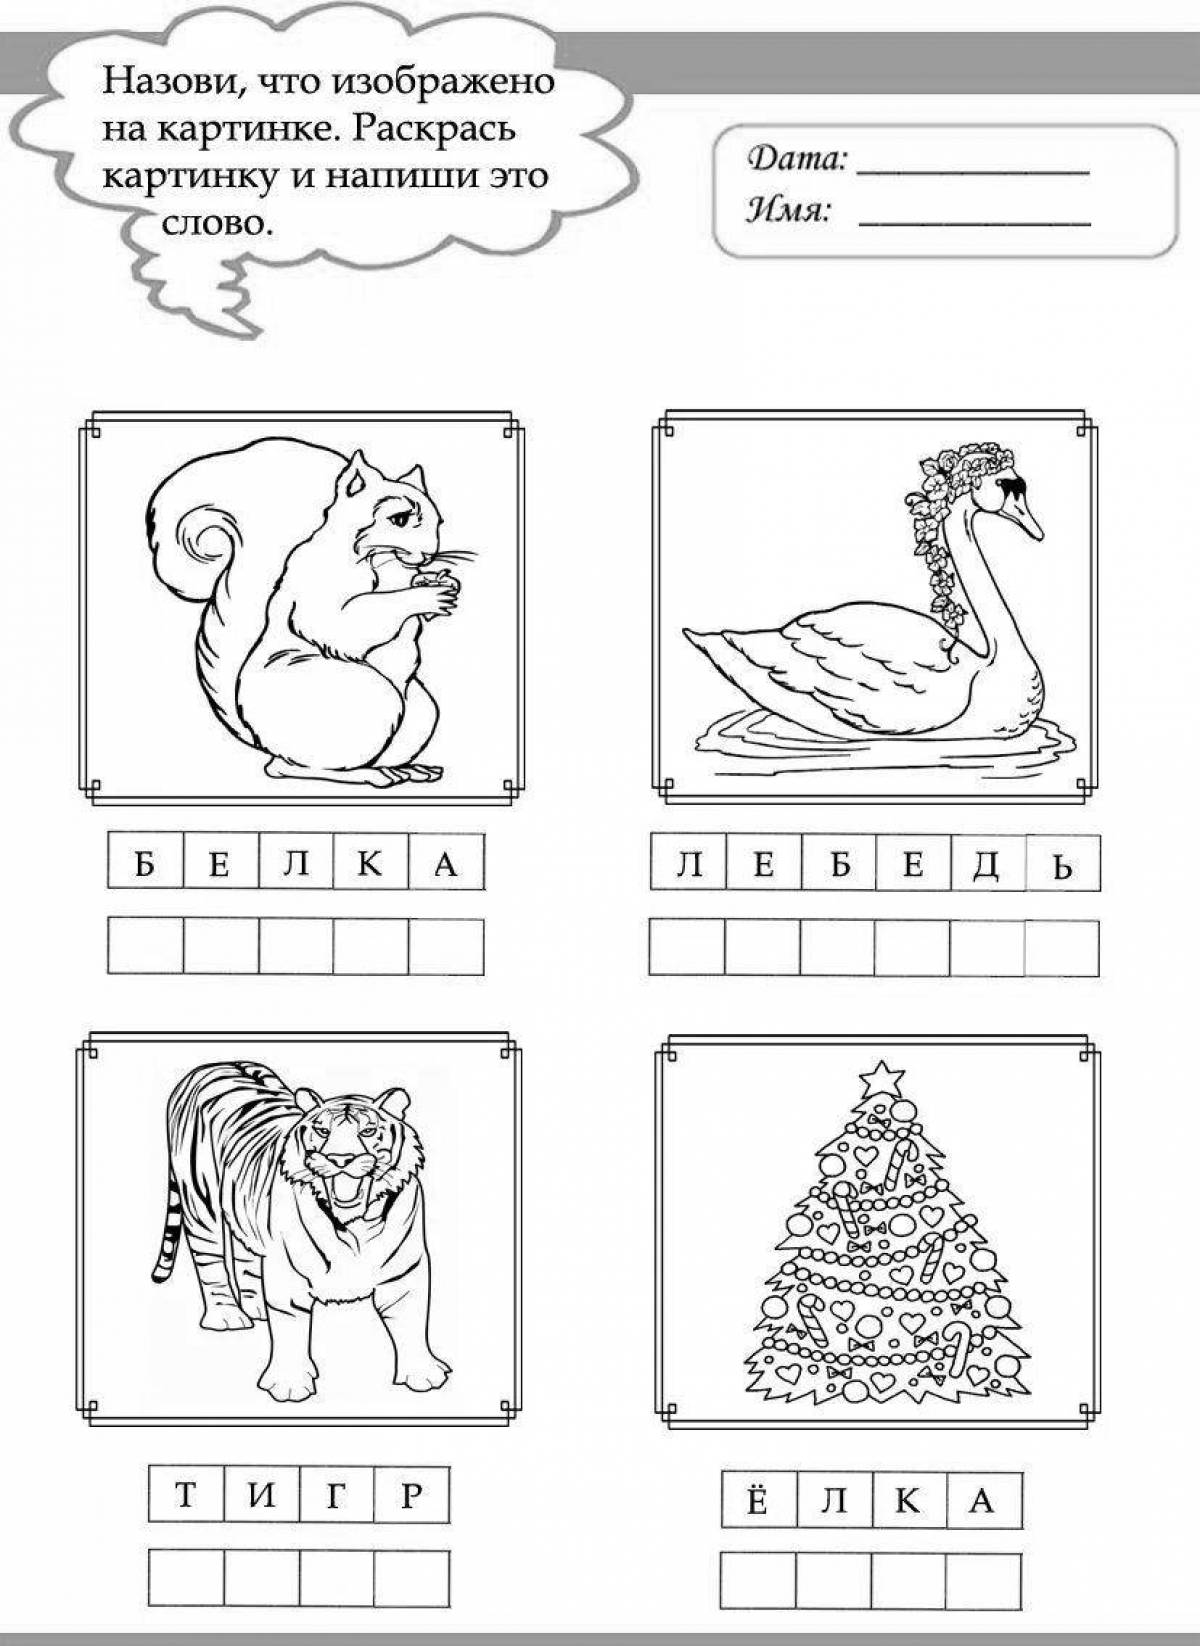 A fascinating coloring book for the 1st grade of a Russian school